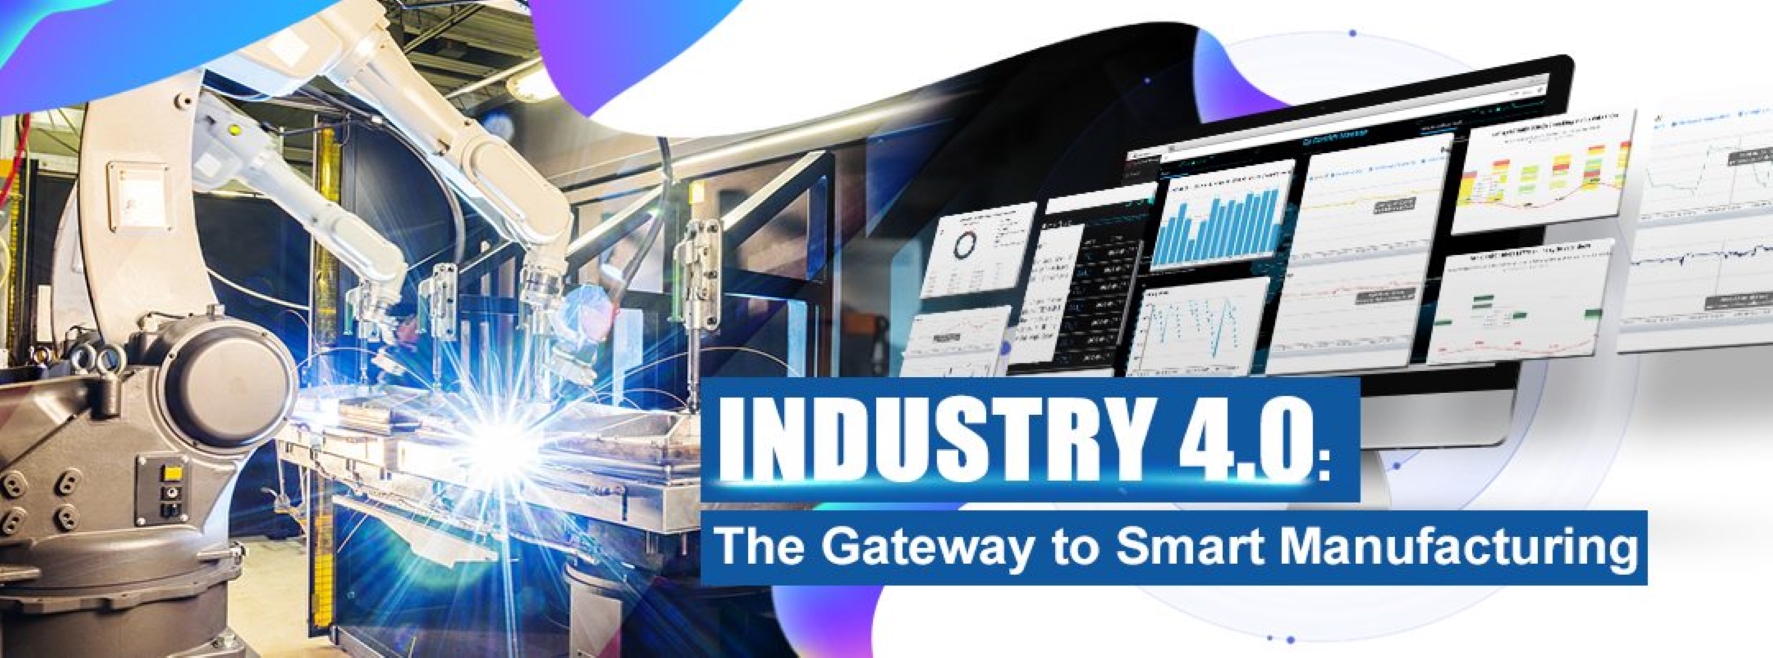 industry-4-0-the-gateway-to-smart-manufacturing-1080x420